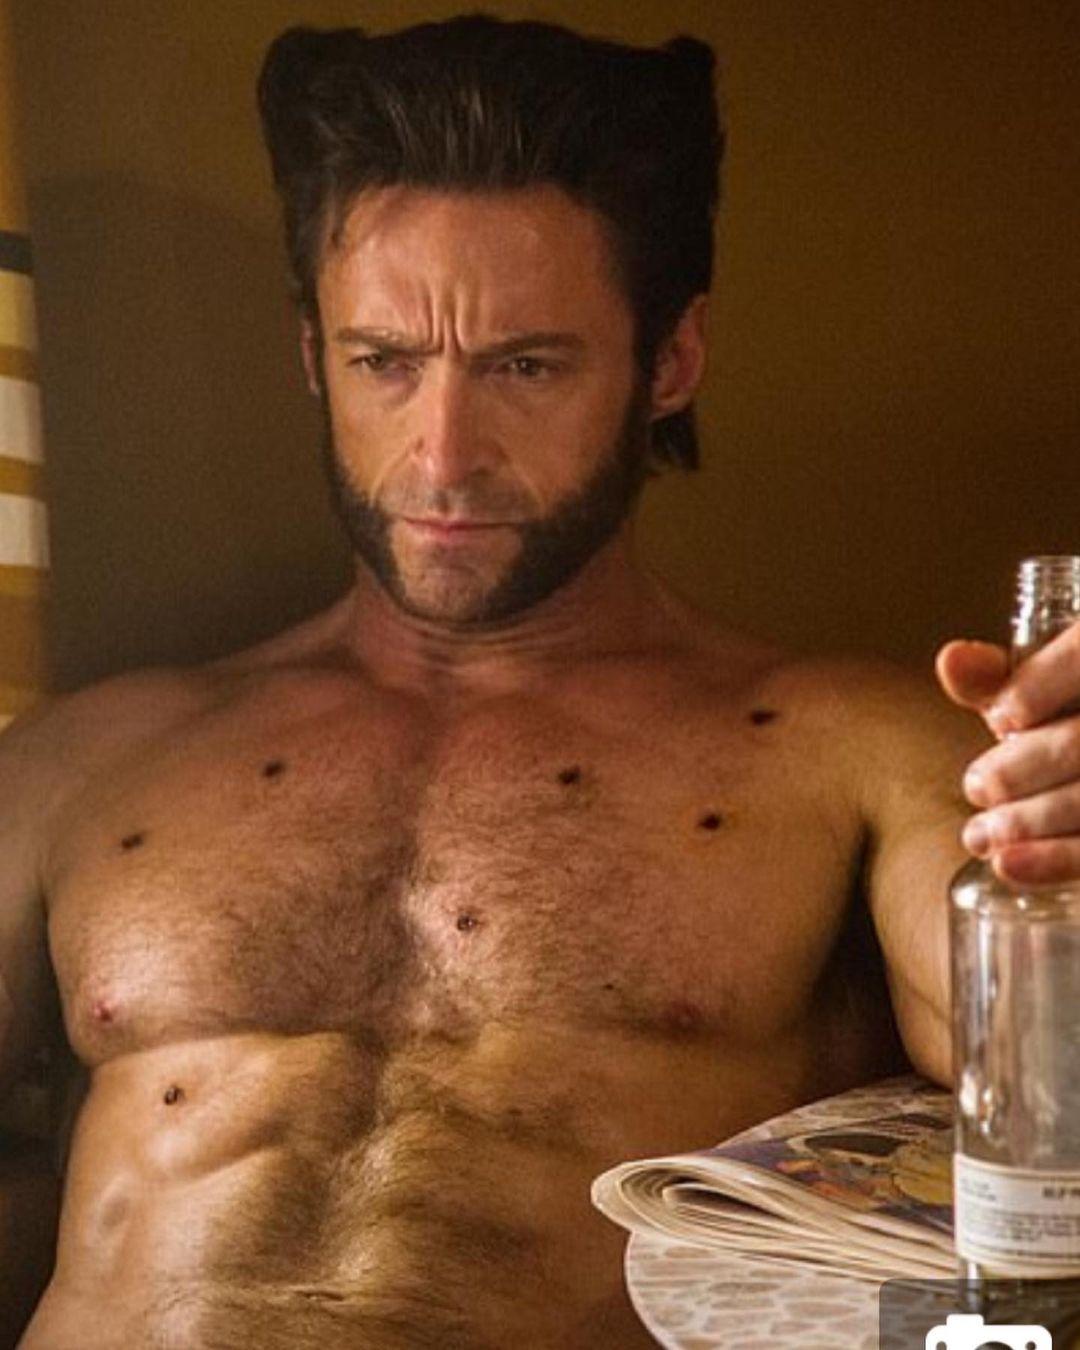 Hugh Jackman Refutes Steroid Allegations In His Fitness Routine For His Wolverine Movies: 'I Don't Love My Job That Much'